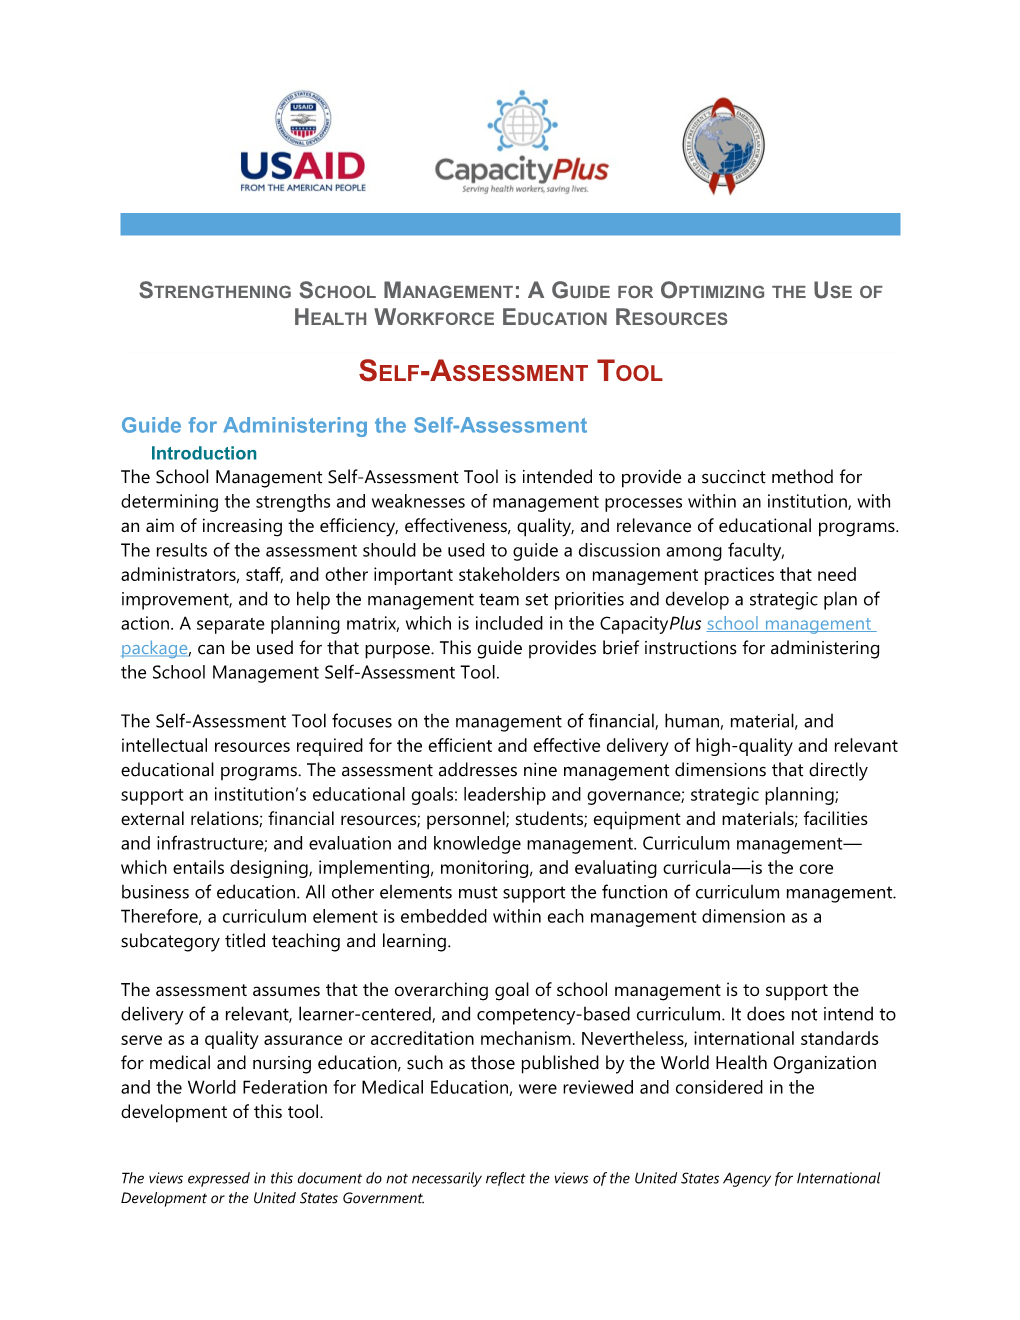 Guide for Administering the Self-Assessment